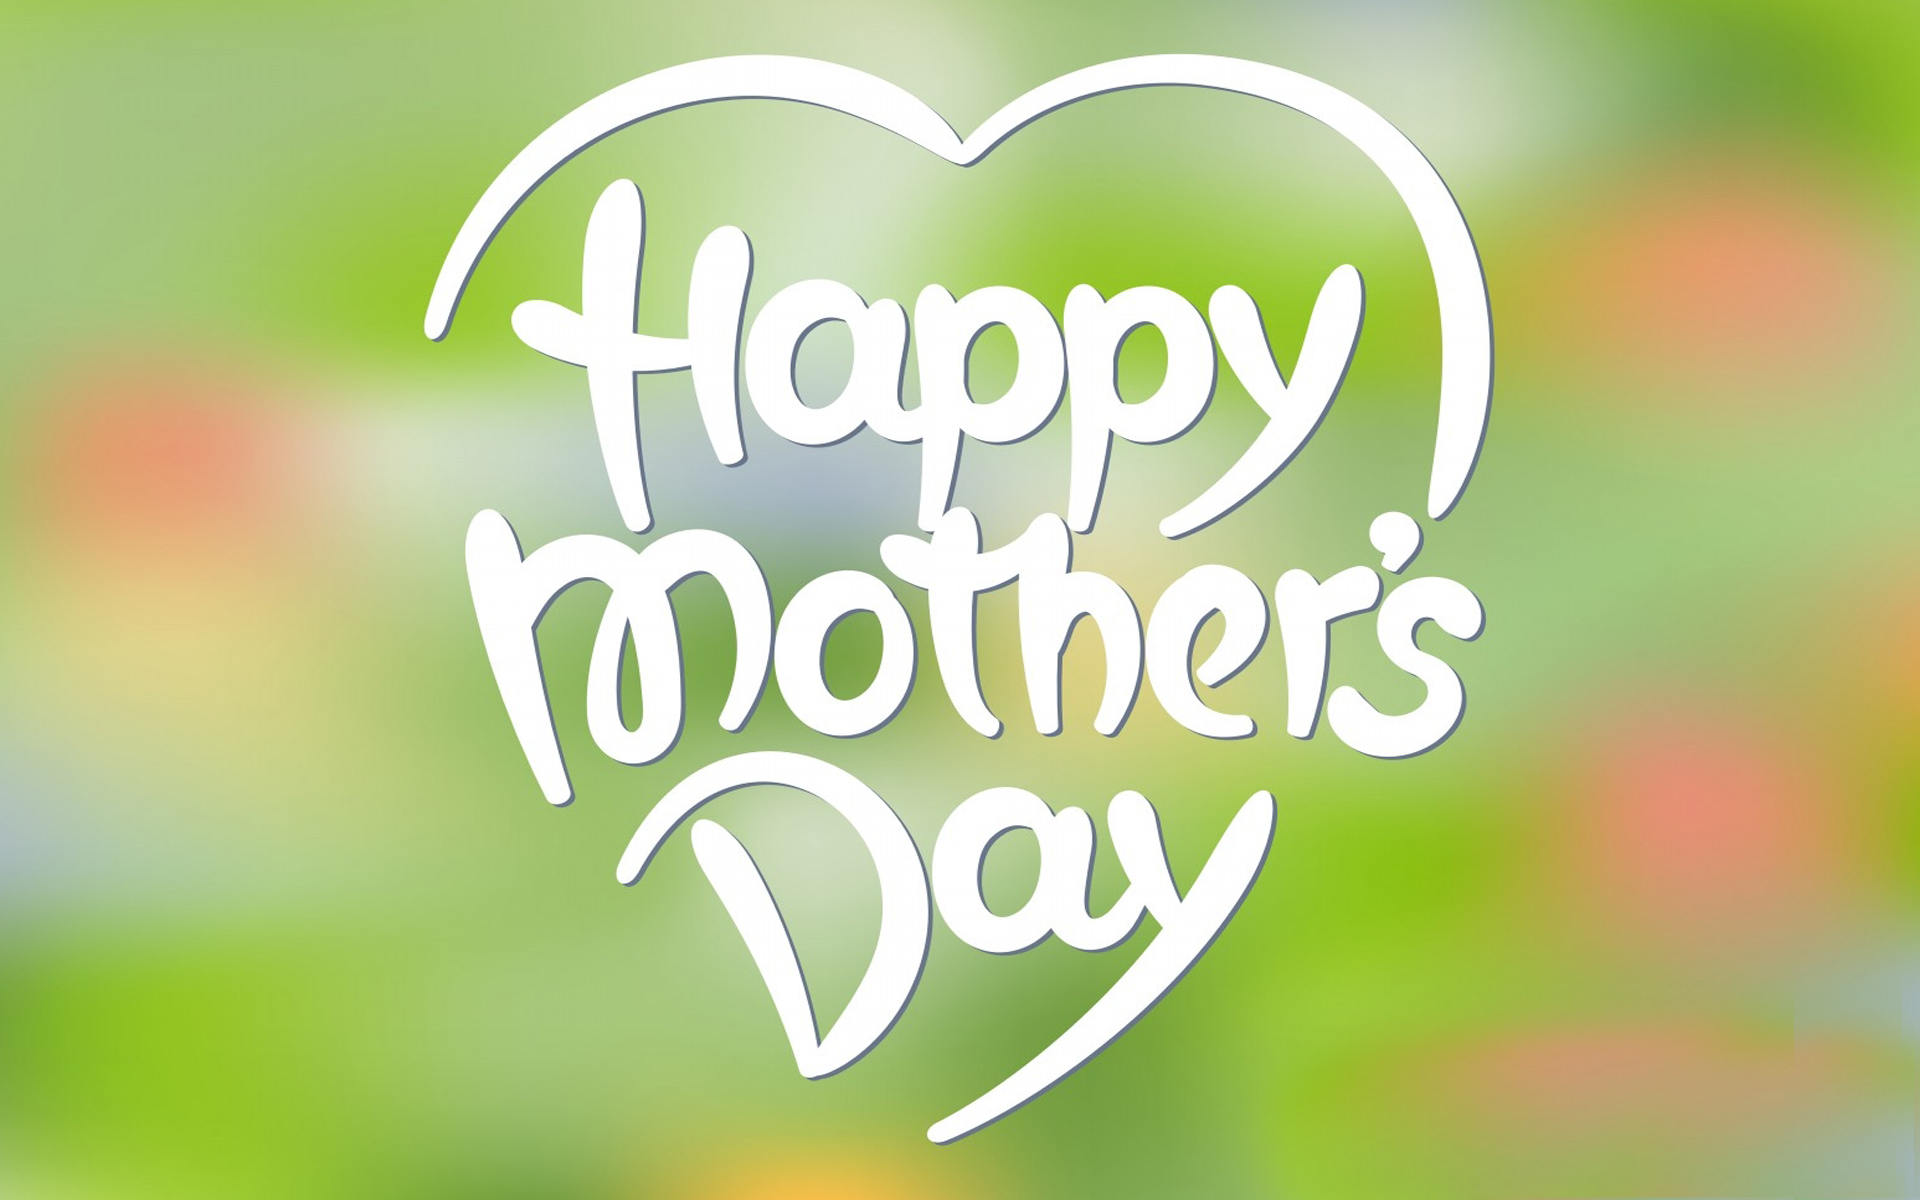 happy mother's day quotes wishes